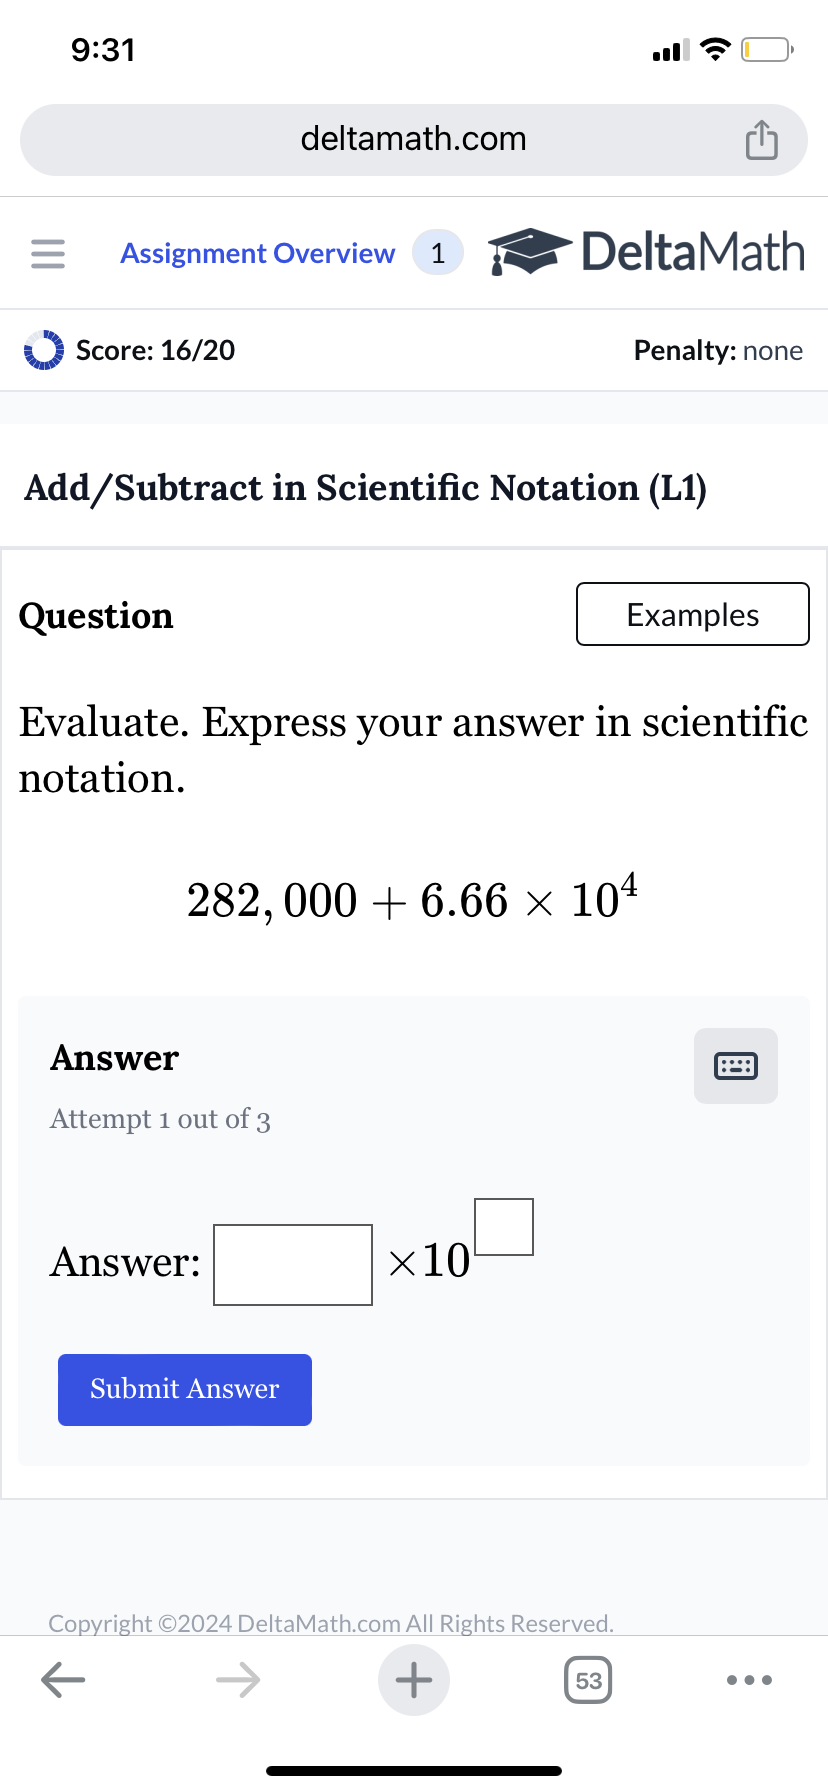 9:31
deltamath.com
= Assignment Overview 1
DeltaMath
Score: 16/20
Penalty: none
Add/Subtract in Scientific Notation (L1)
Question
Examples
Evaluate. Express your answer in scientific
notation.
282,000+ 6.66 × 104
Answer
Attempt 1 out of 3
Answer:
Submit Answer
×10
Copyright ©2024 DeltaMath.com All Rights Reserved.
←
+
53